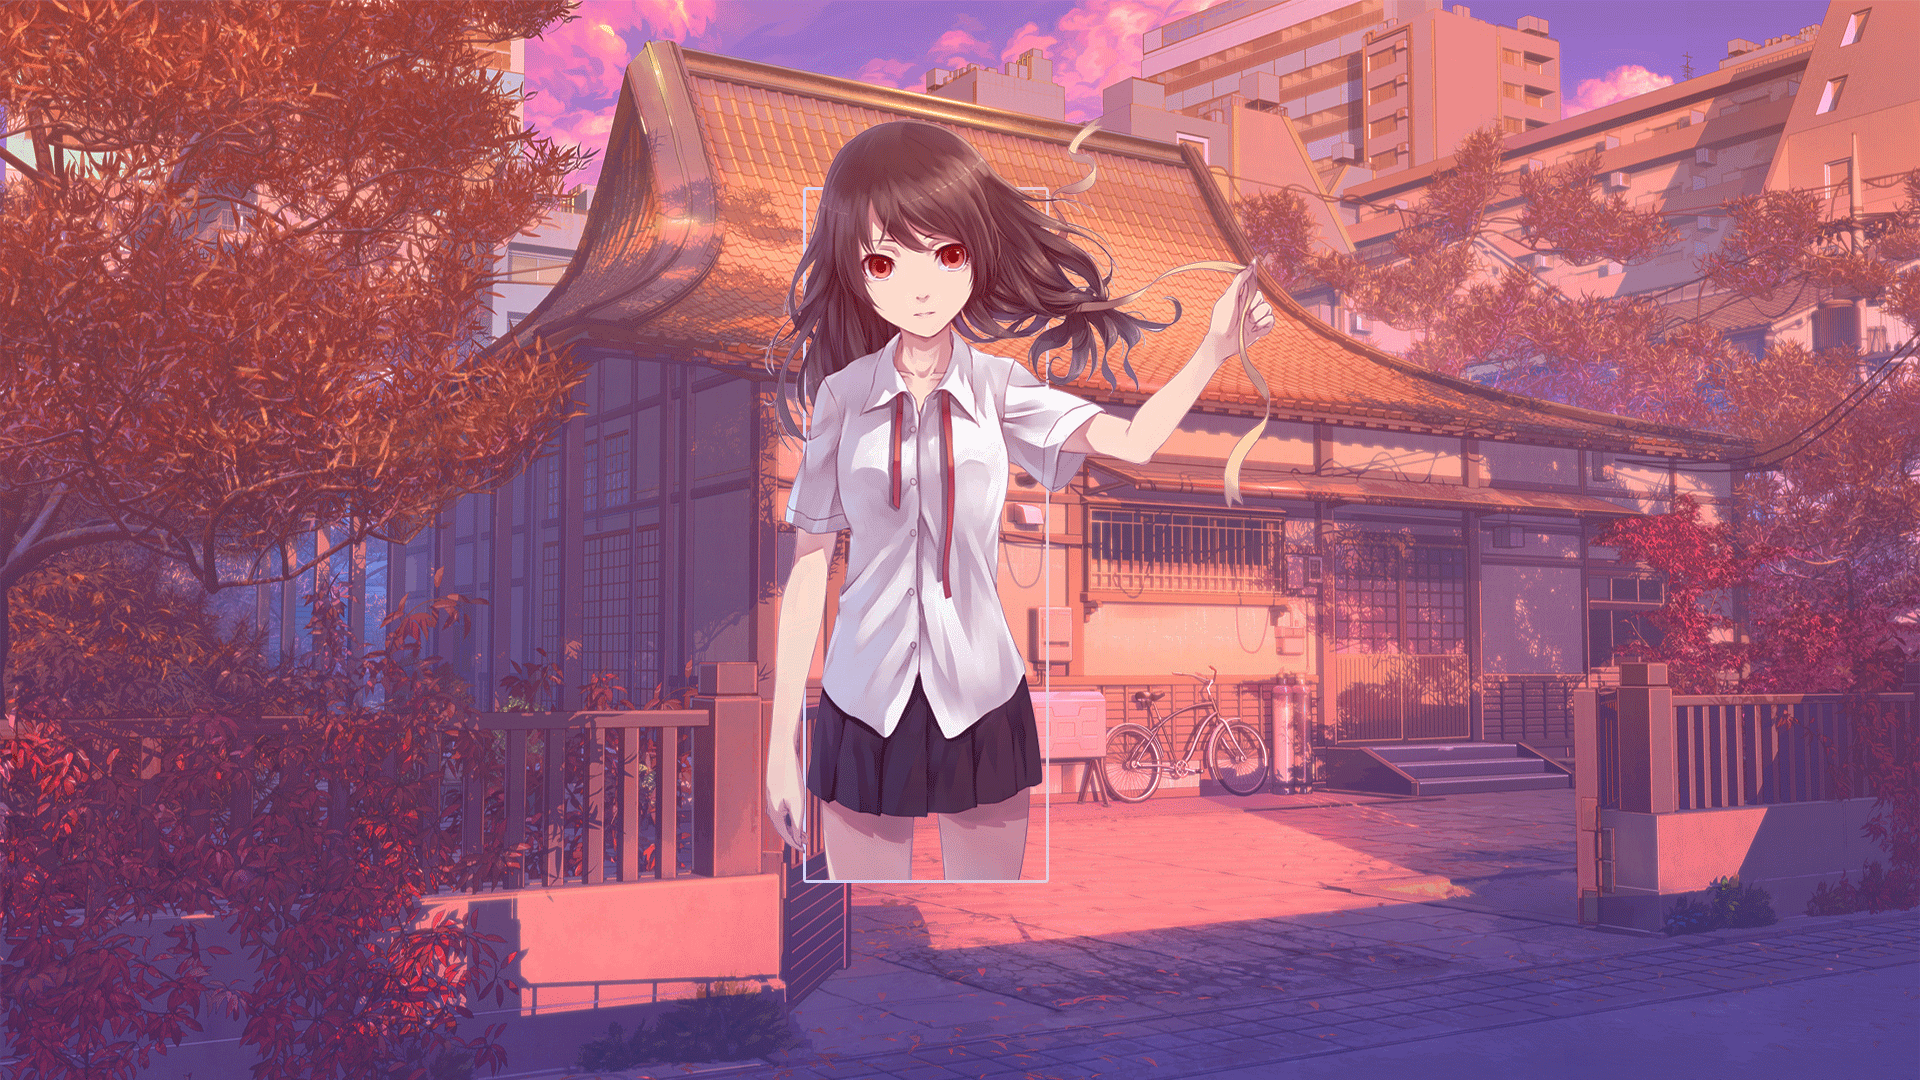 Anime Anime Girls Photoshop Digital Art Picture In Picture Background Art School Uniform Afternoon 1920x1080